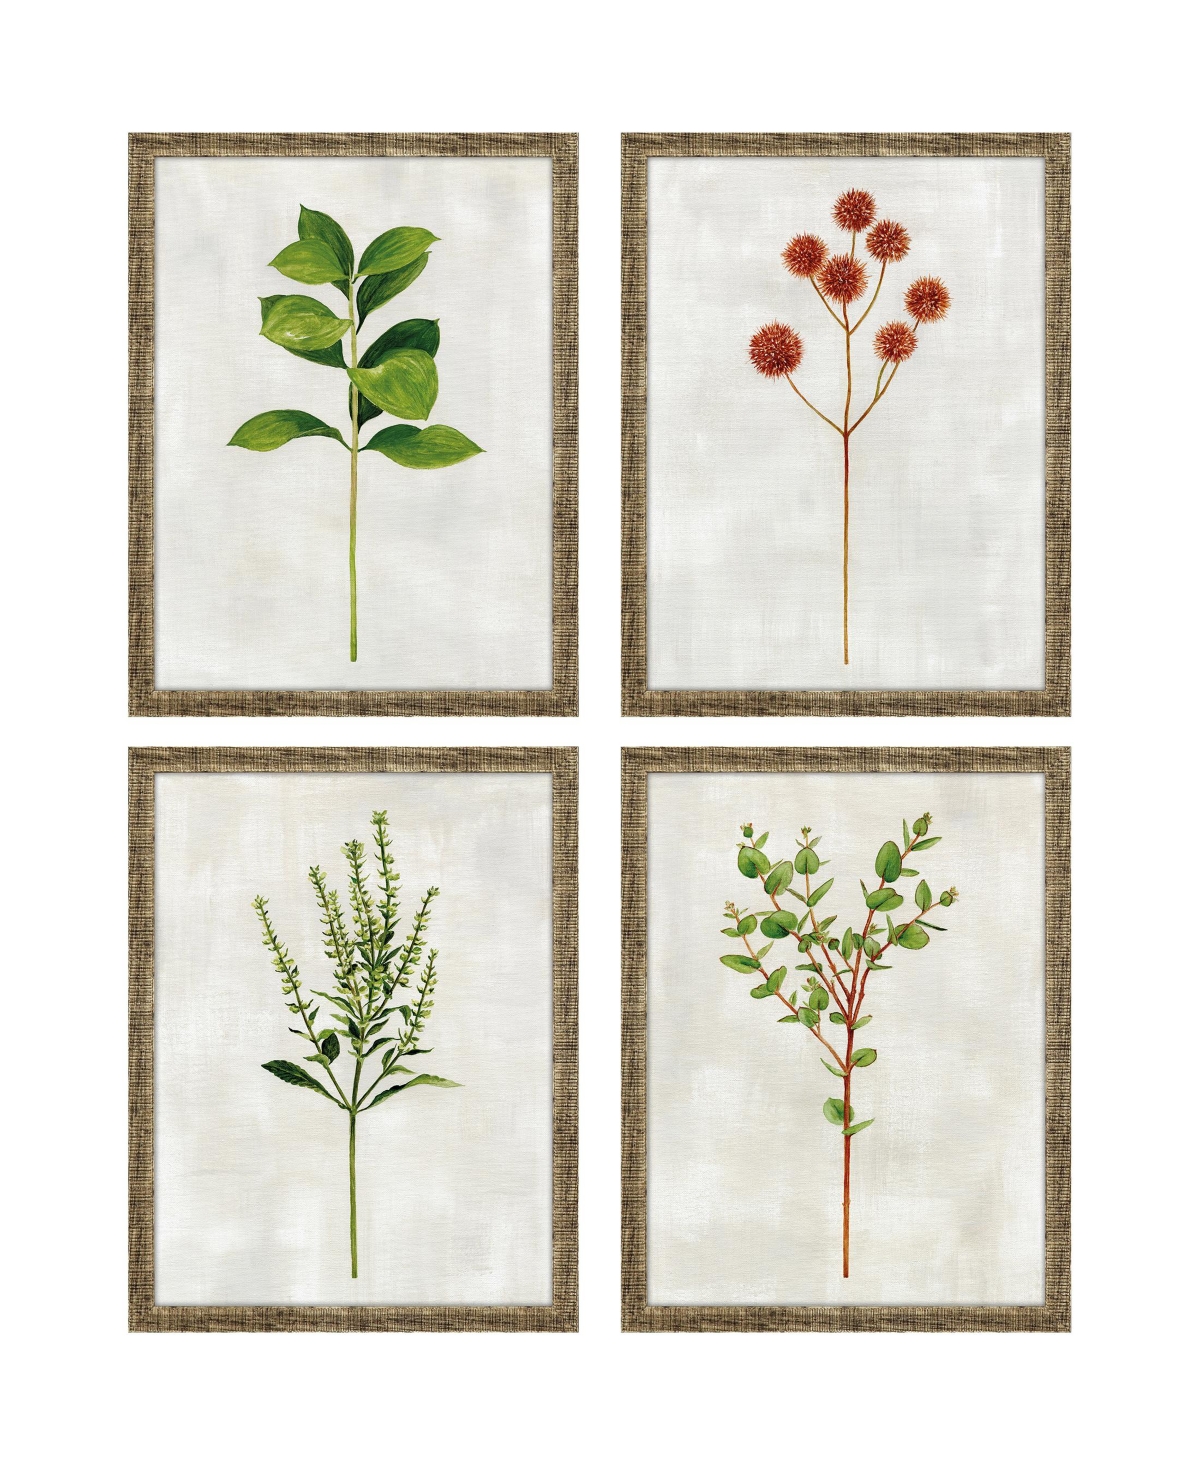 Paragon Picture Gallery Botanical Ii Framed Art, Set Of 4 In Green